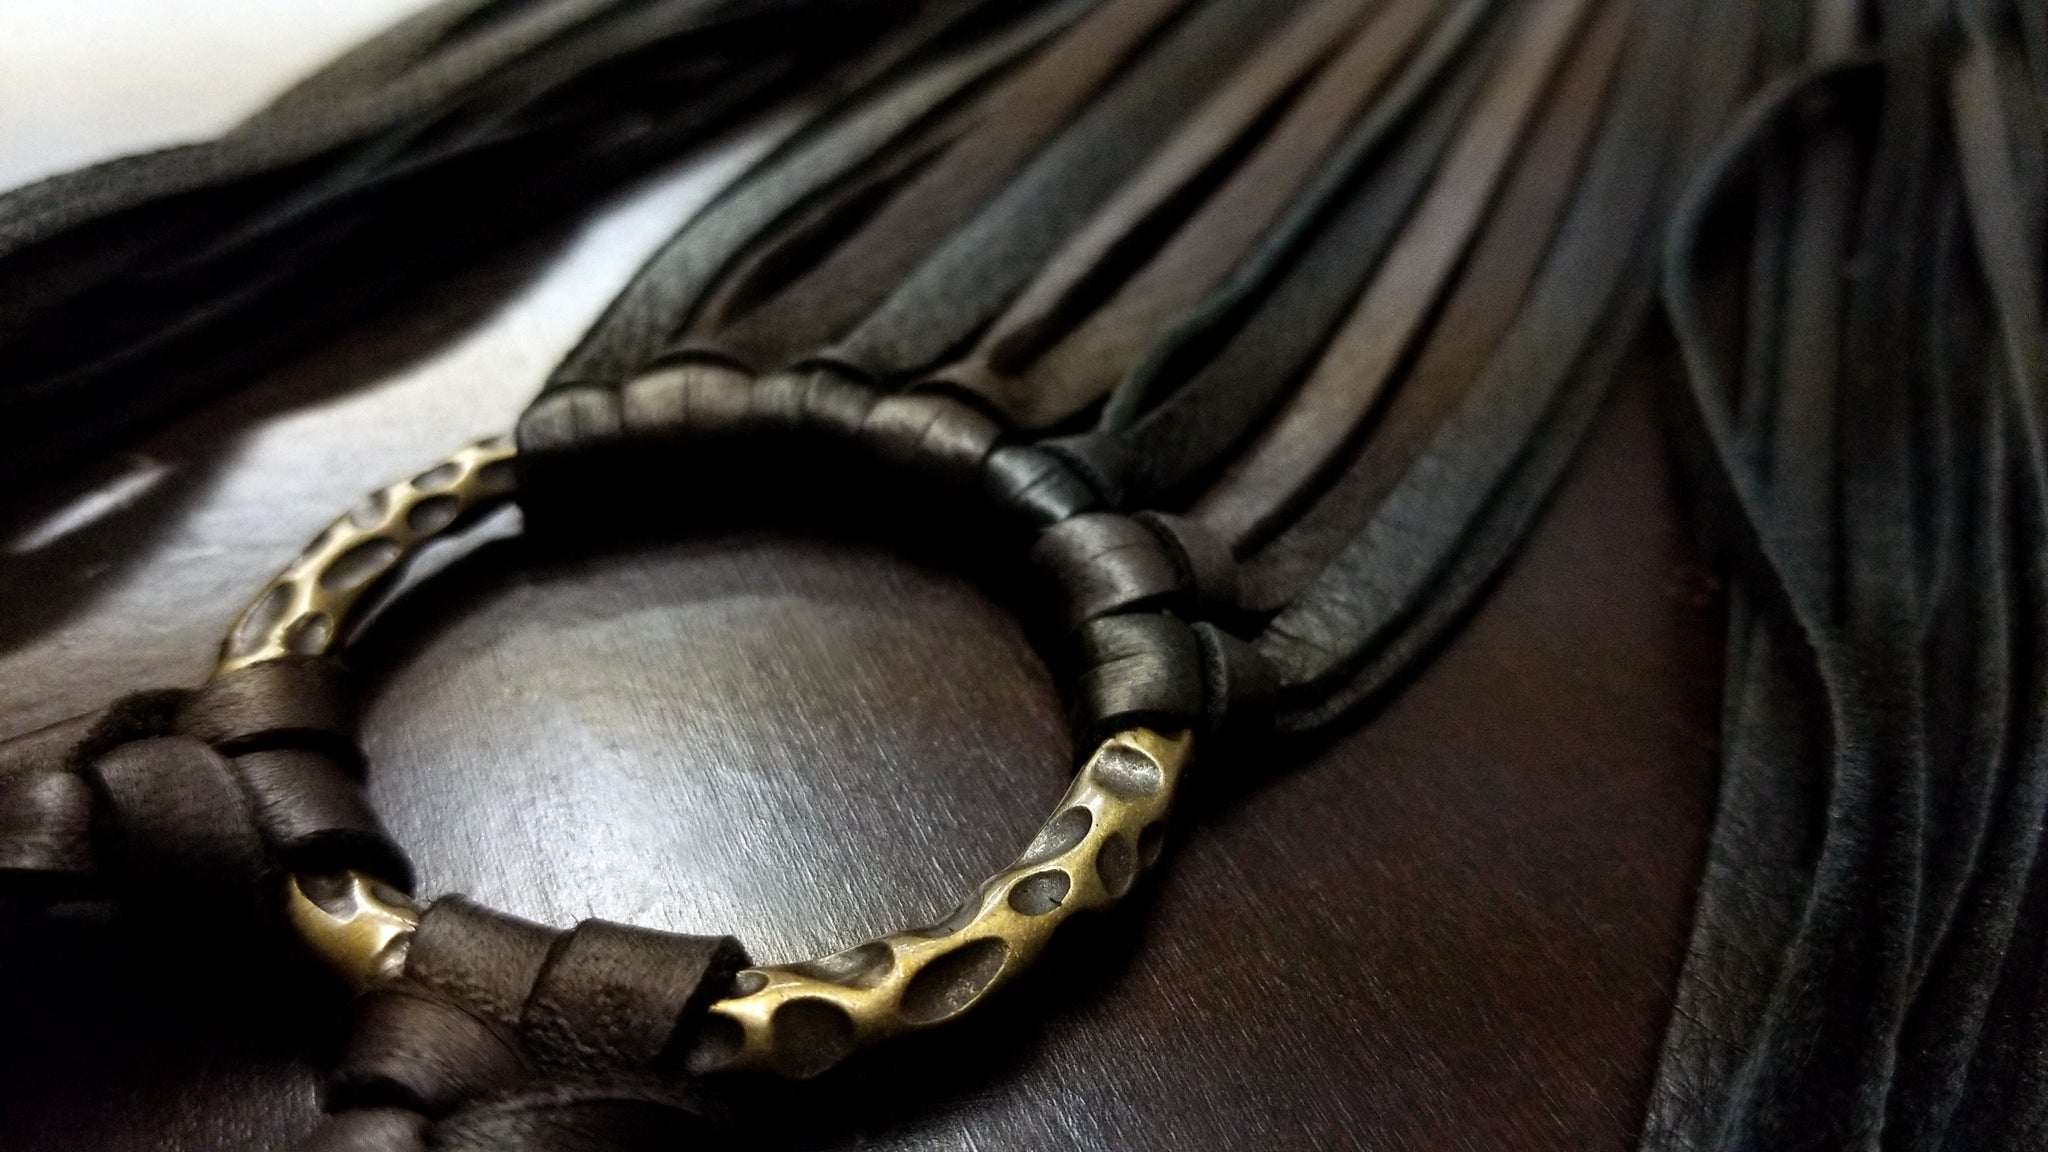 Old World Hammered Rings; brass and silver, aisha braided leather circle of life necklace